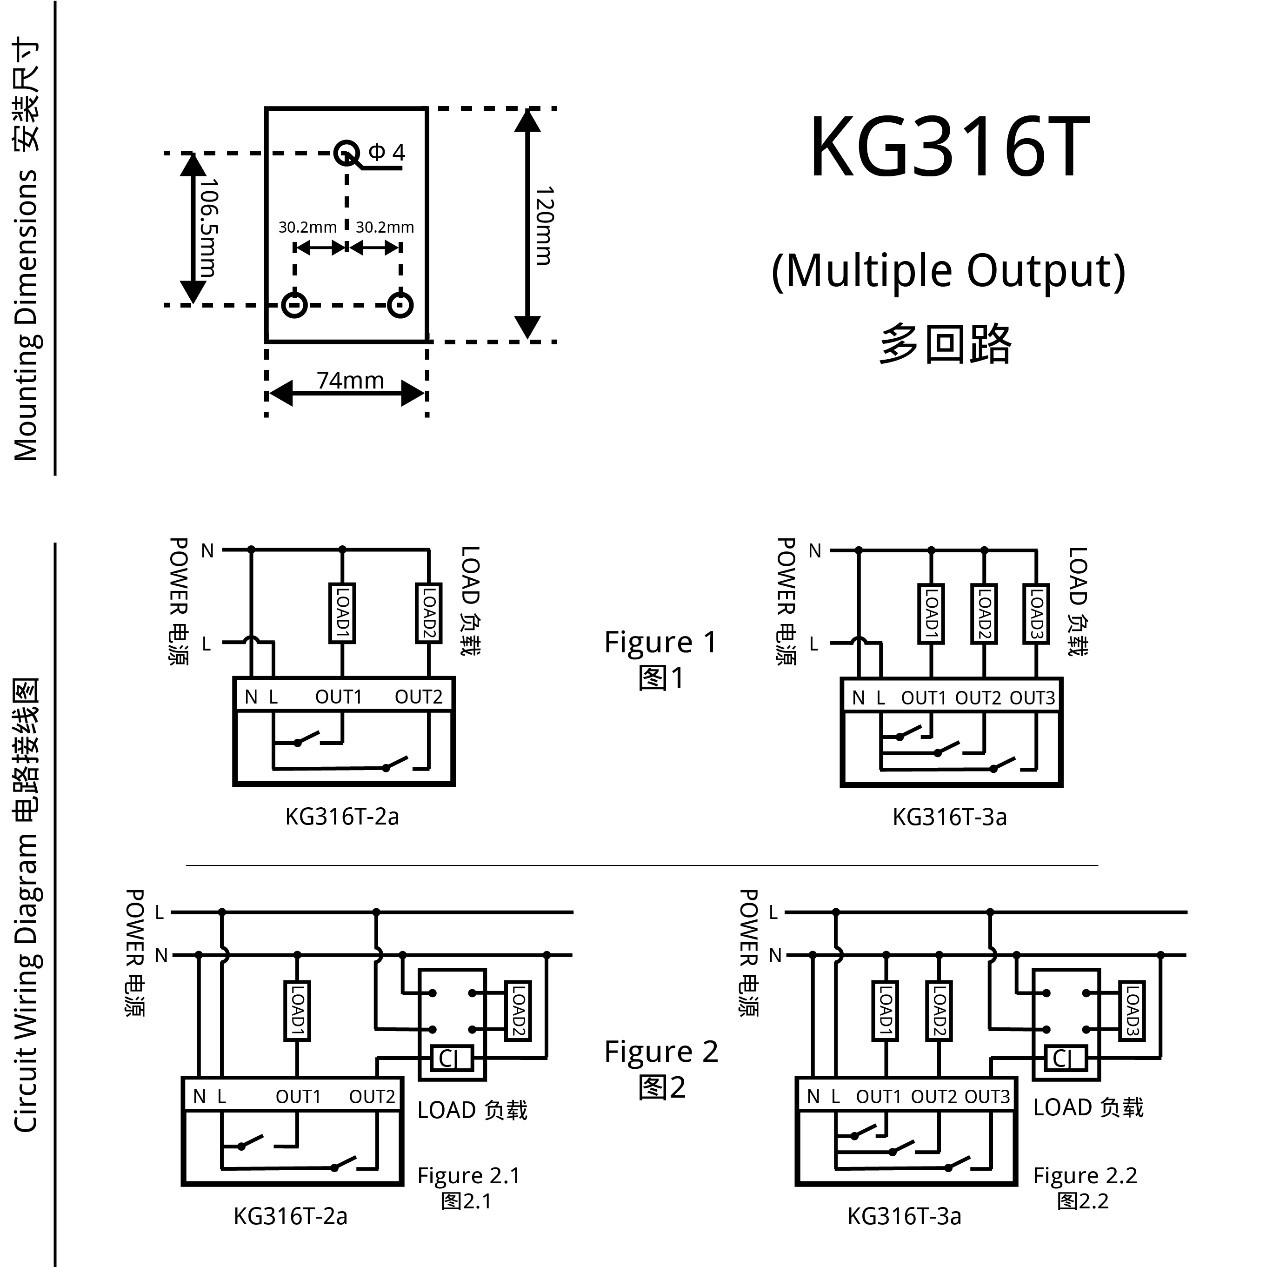 KG316T (multiple output) dimensions and wiring diagram